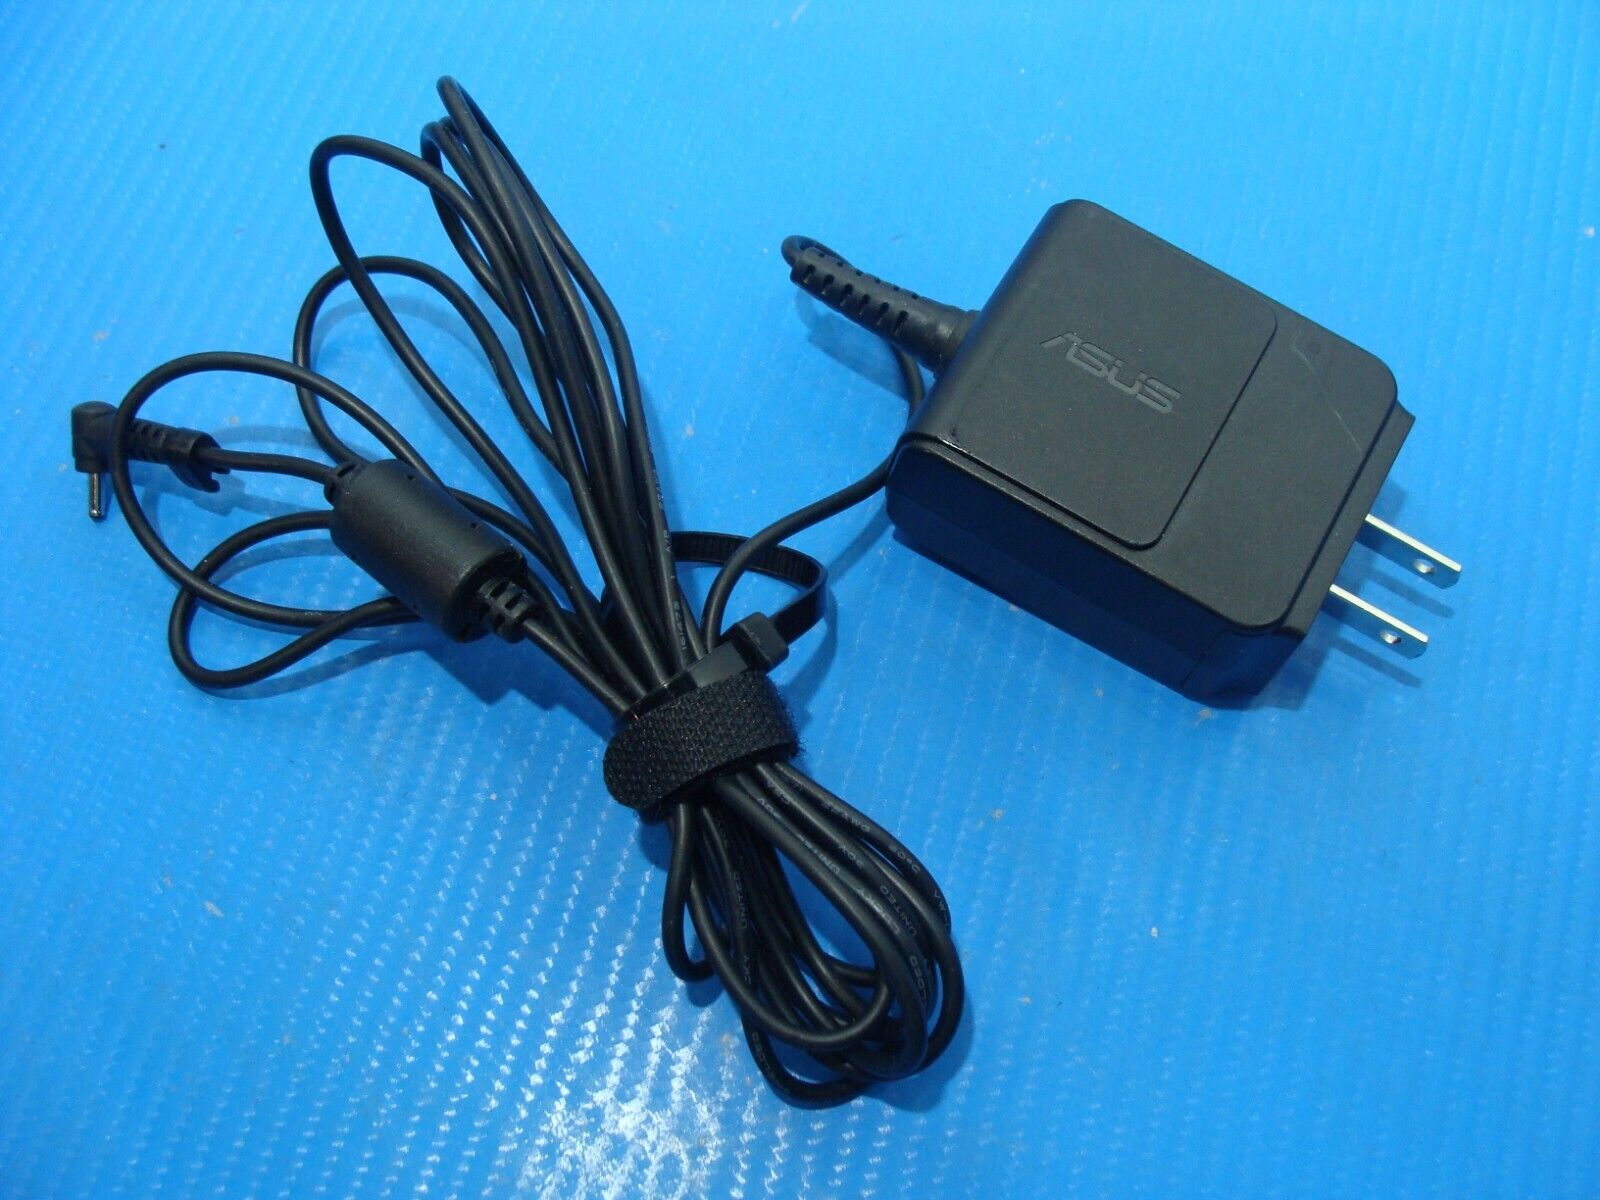 Asus AD82030 OEM Original 19V 1.58A Power Supply Charger Cord Cable Adapter 30W